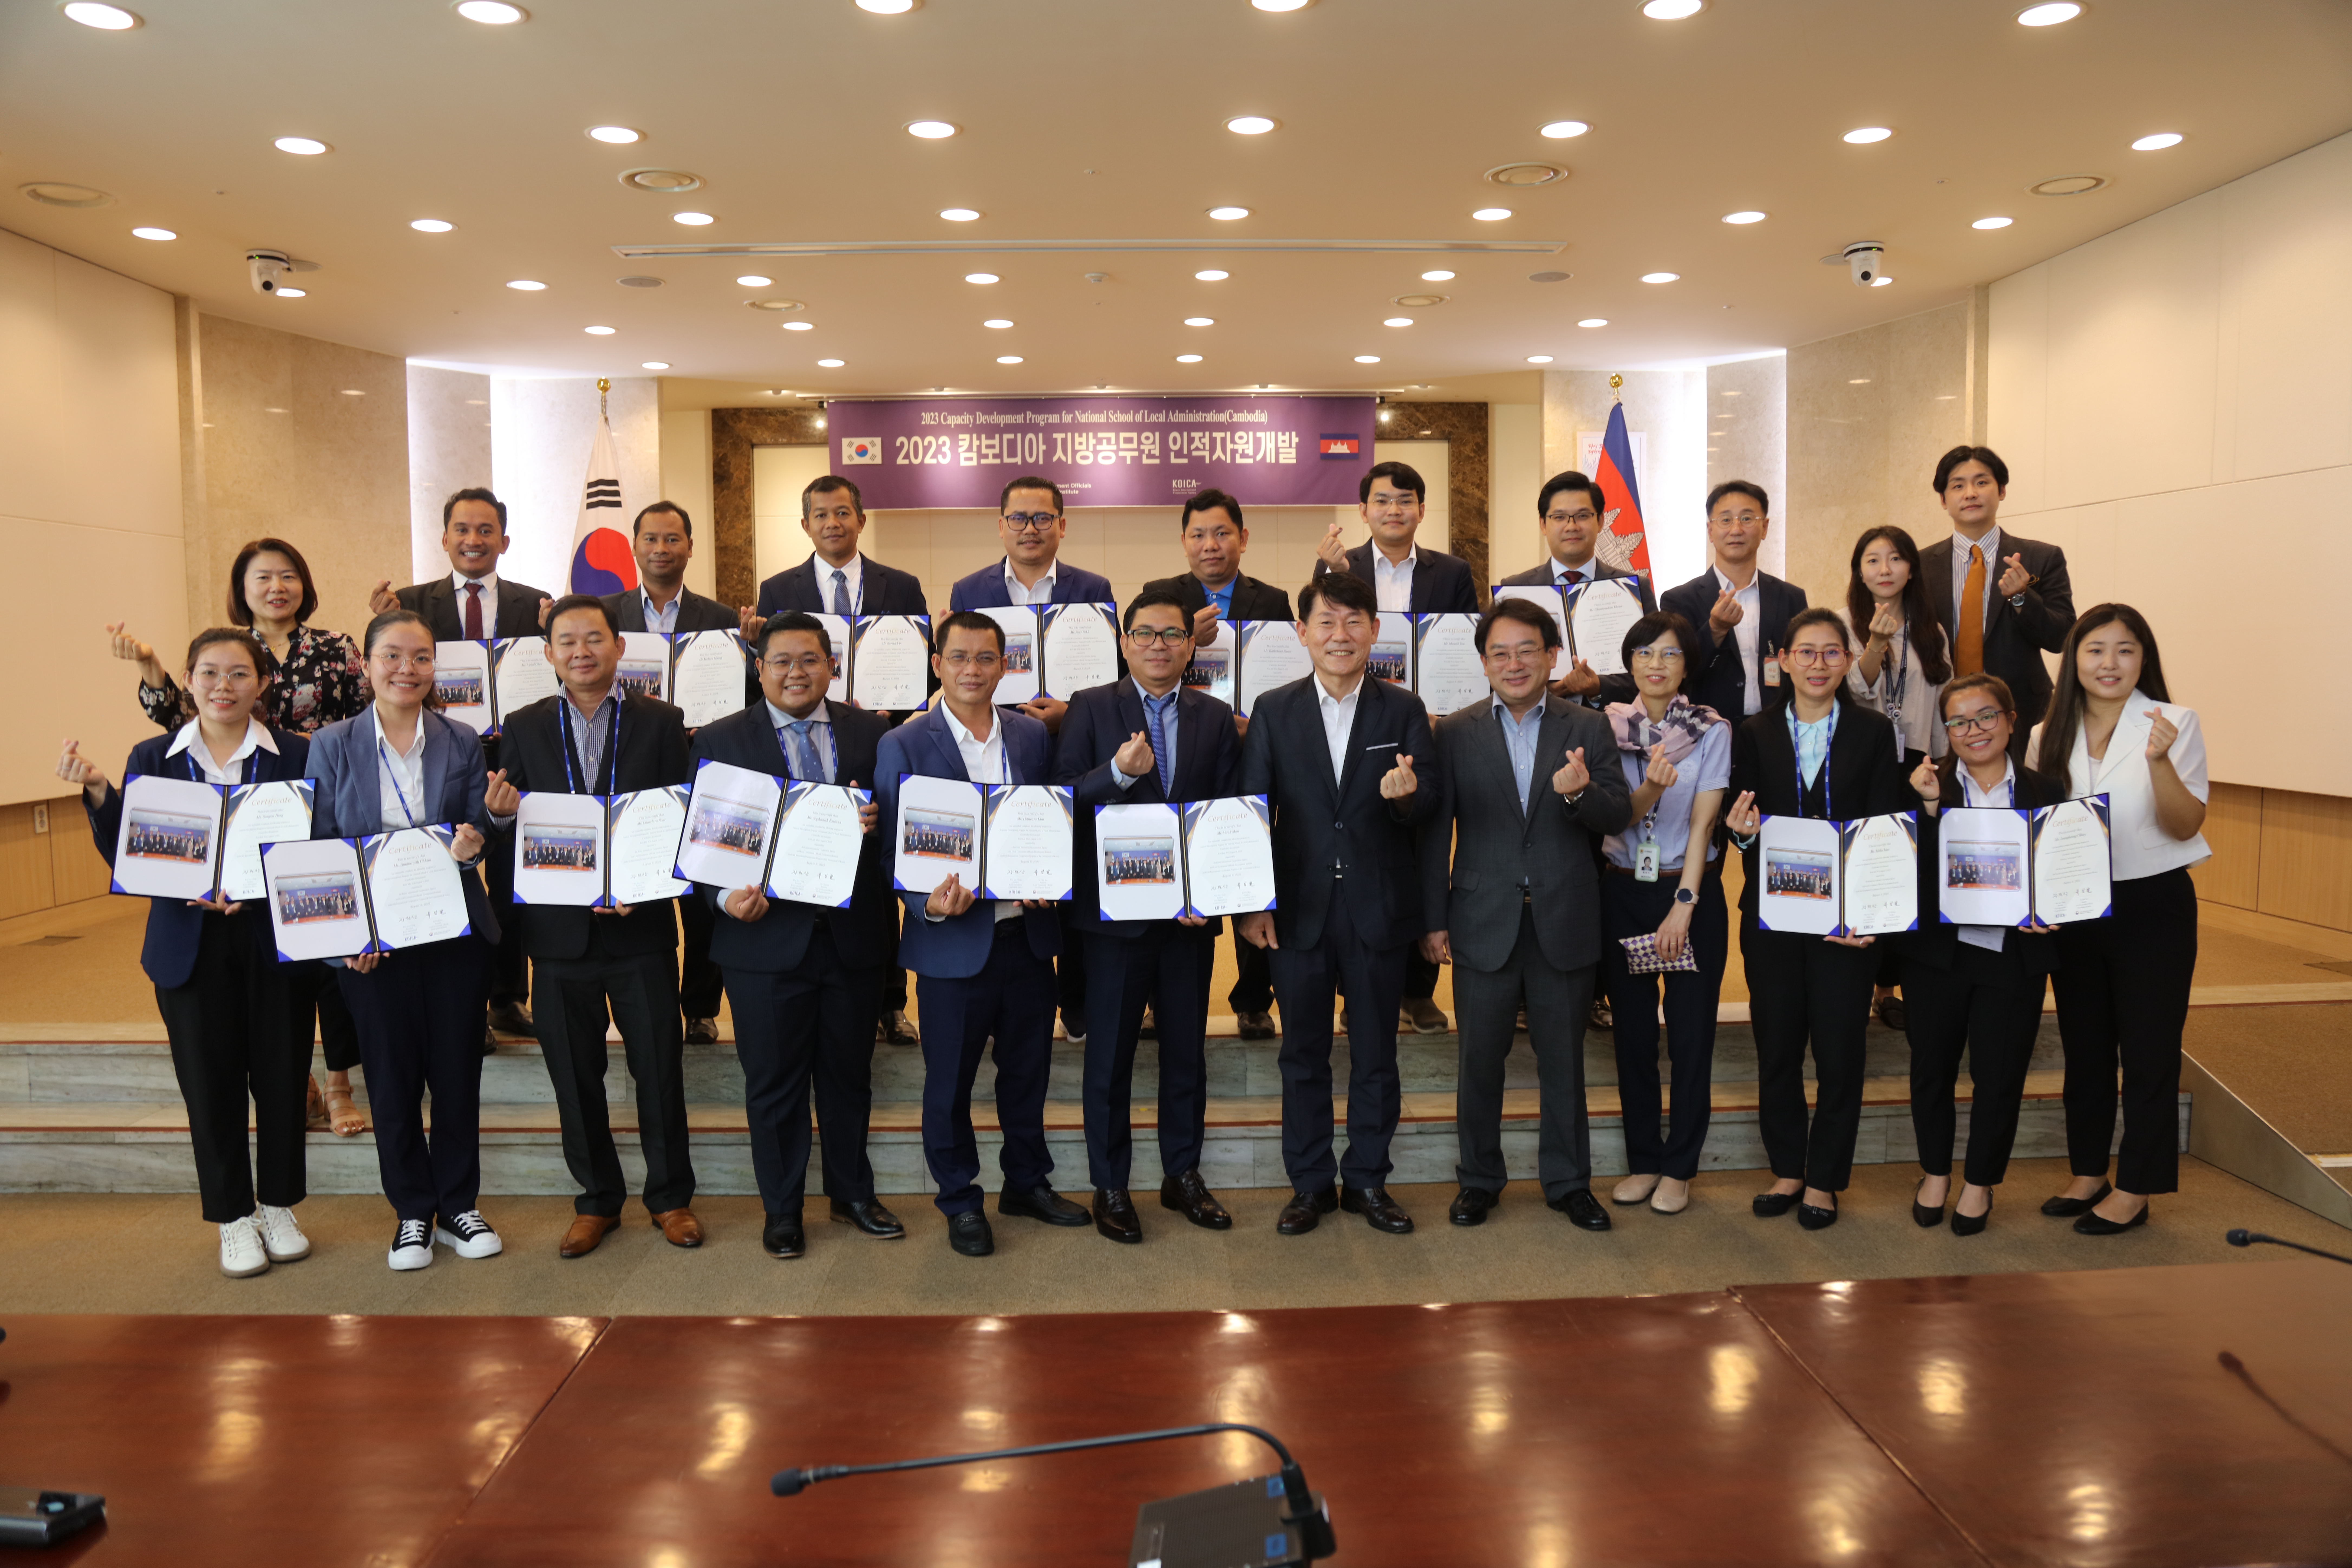 Cambodian Officials Completed the Third Round of the Customized Program 큰 이미지[마우스 클릭 시 창닫기]